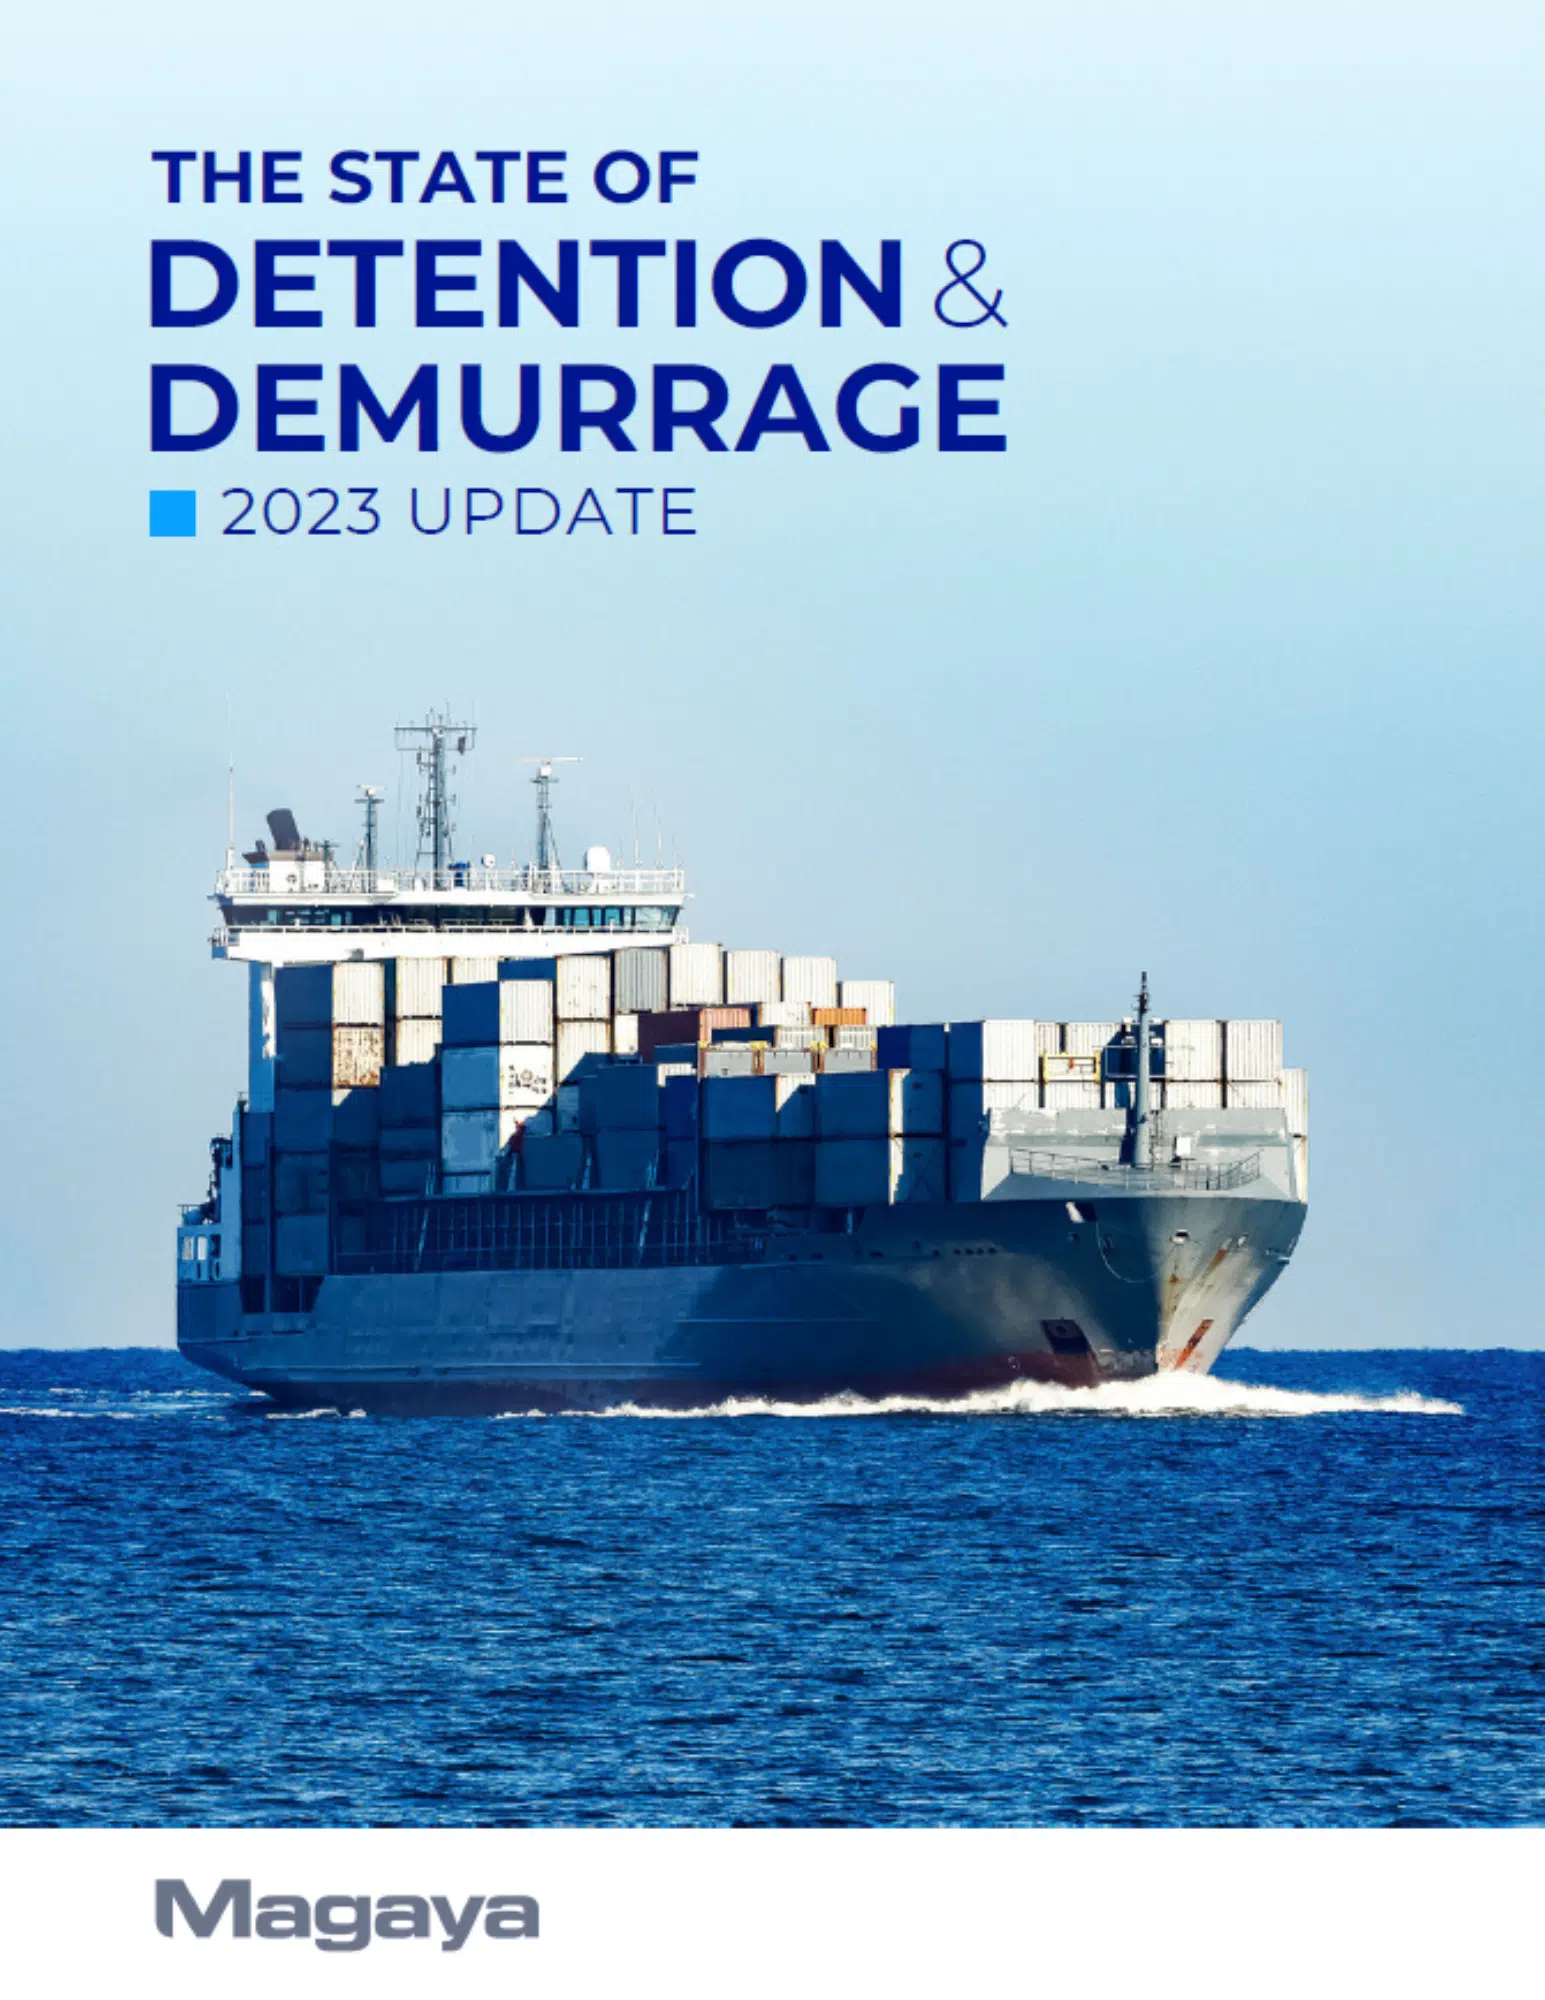 The State of Detention and Demurrage